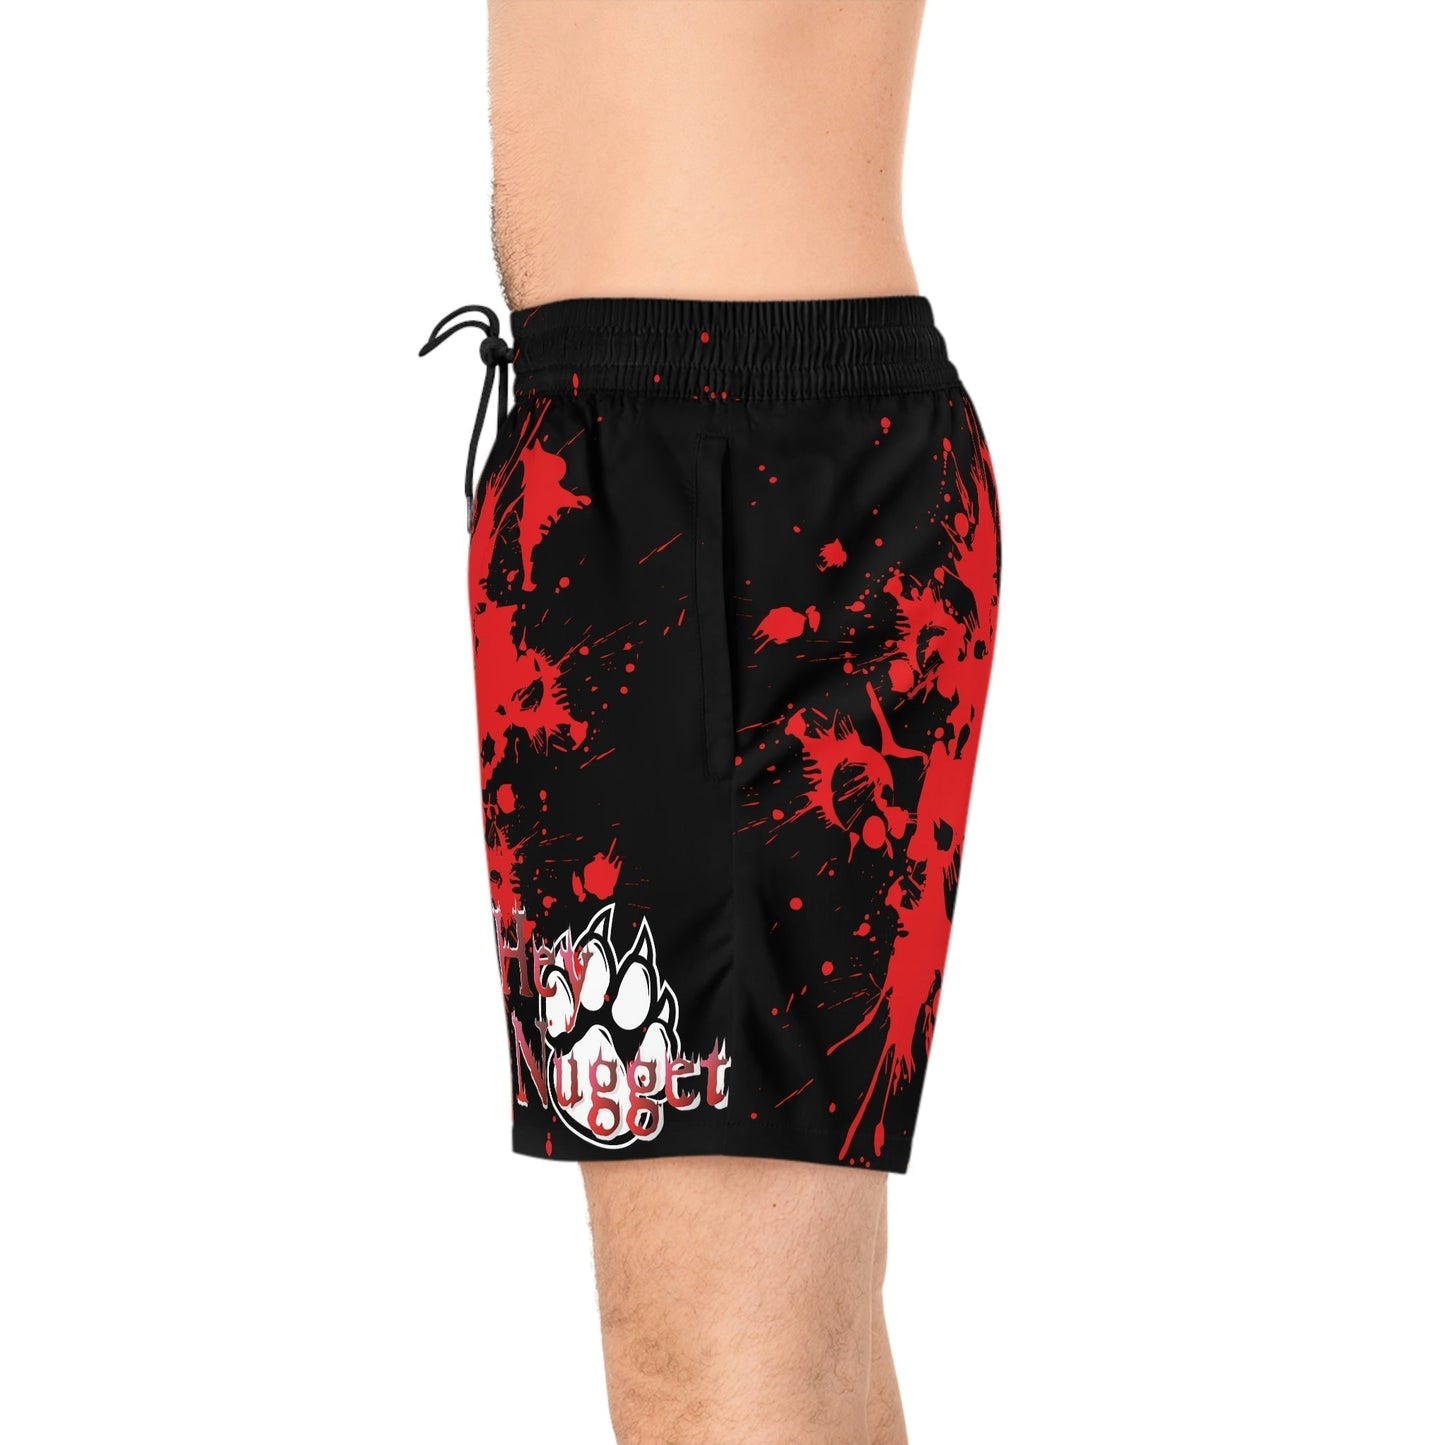 Stand out  with the  Men's Mid-Length Swim Shorts  available at Hey Nugget. Grab yours today!